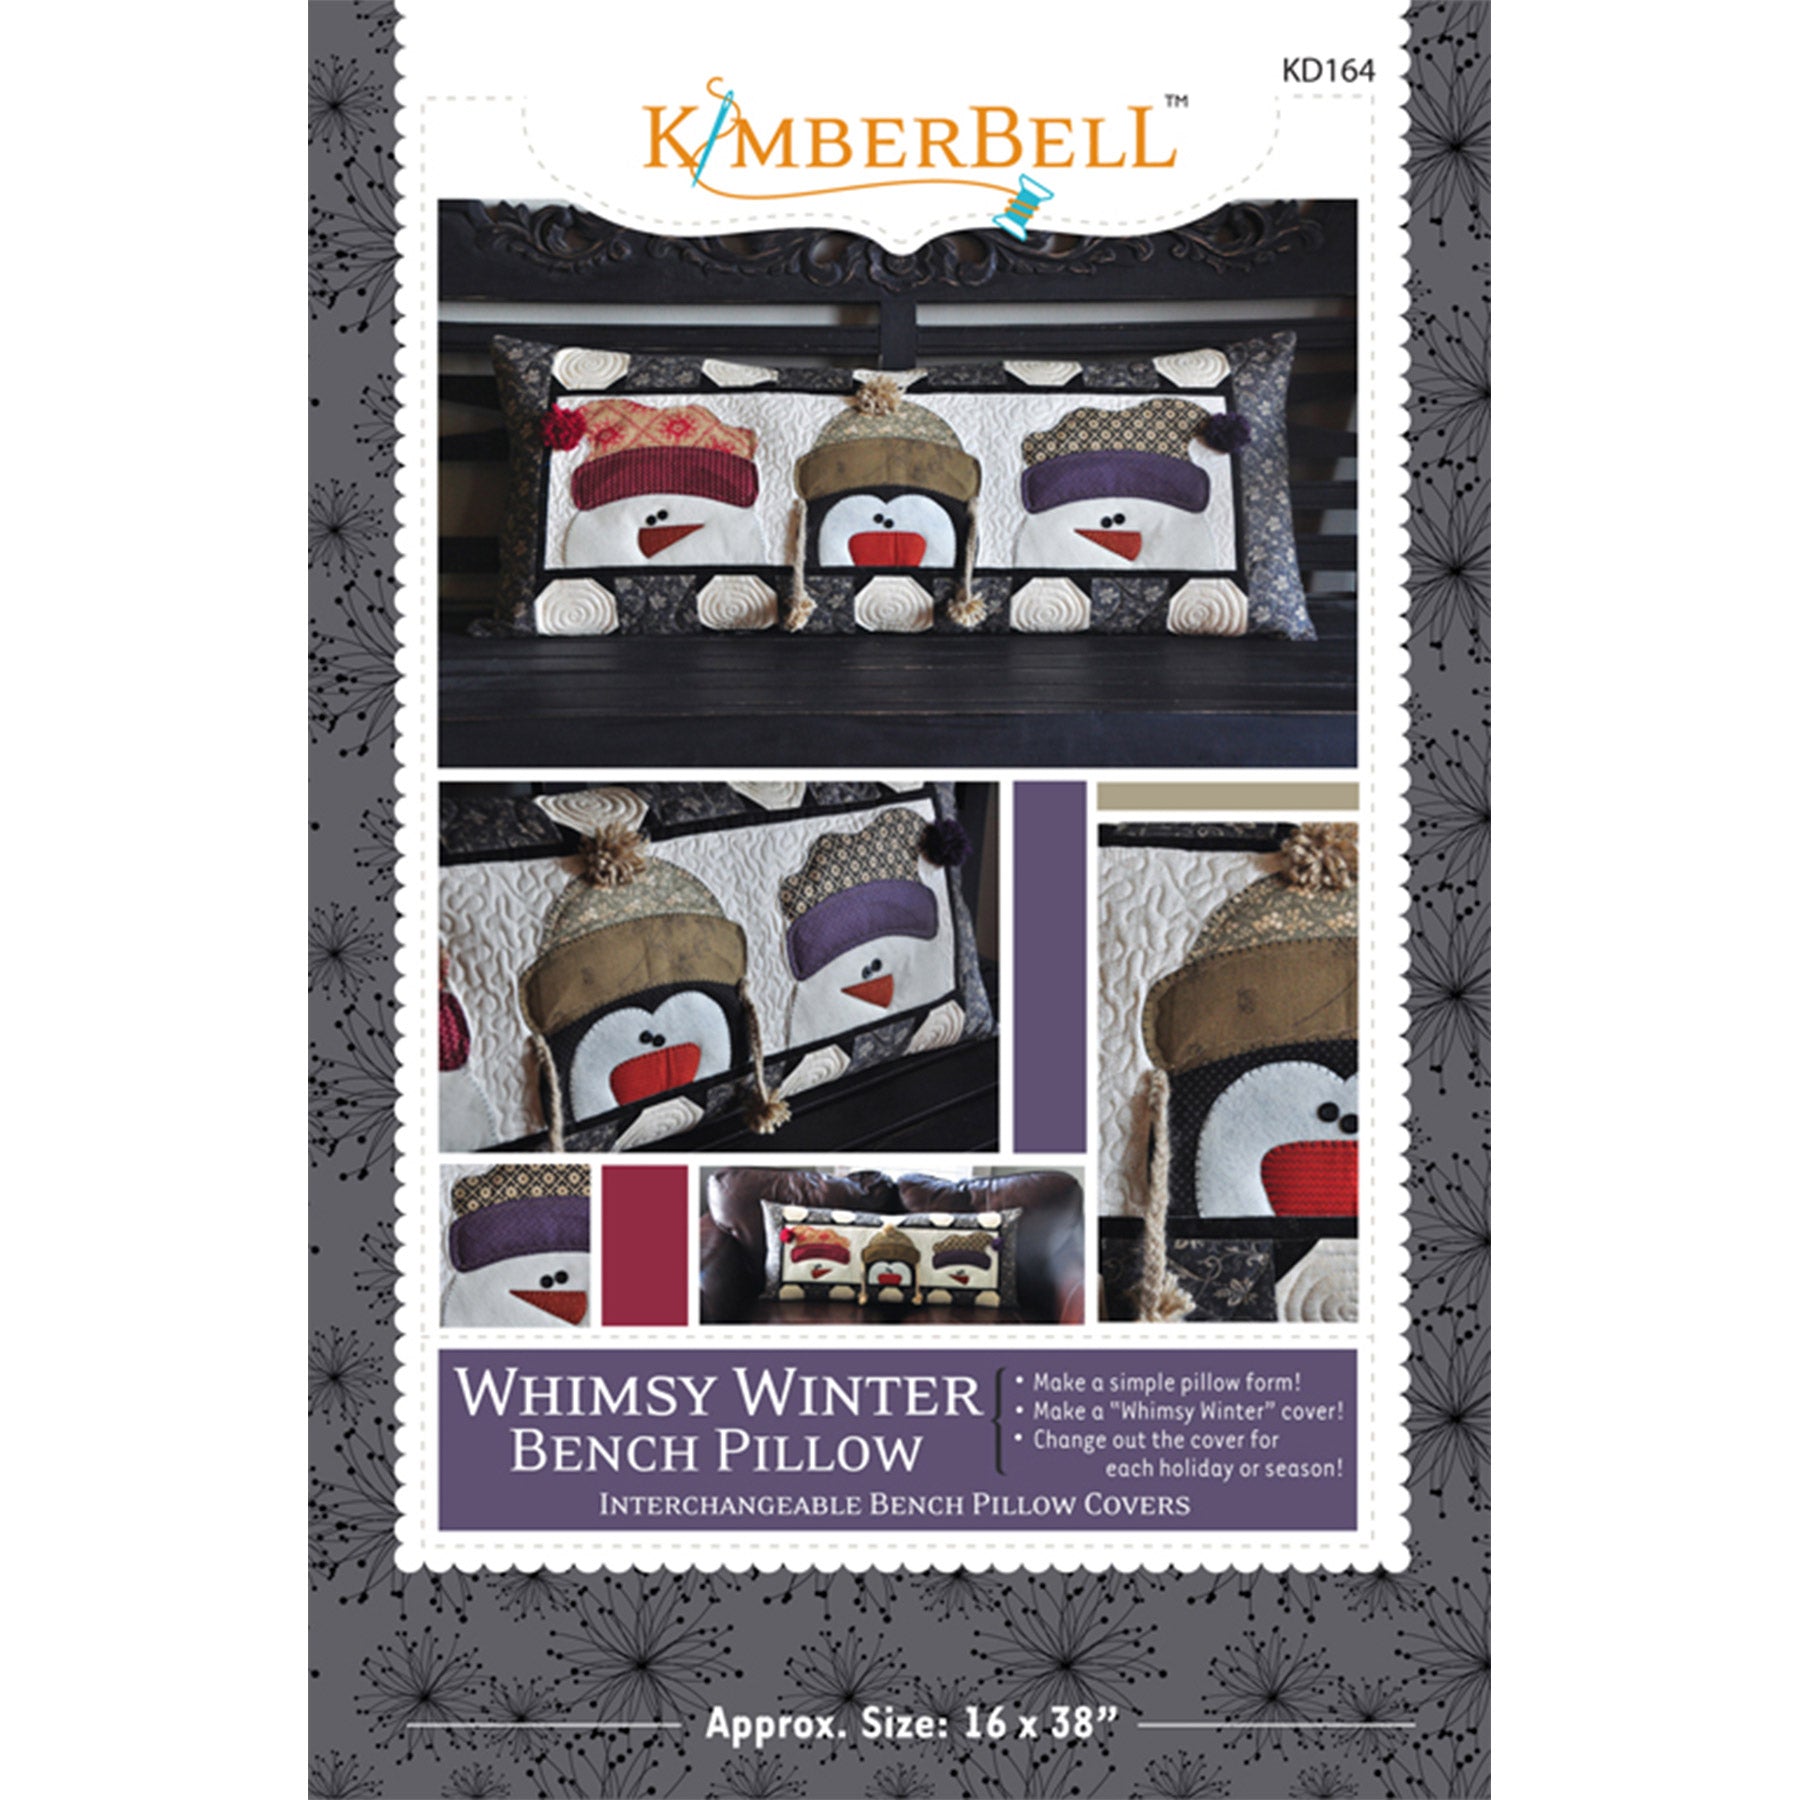  Delightful snowmen and a penguin with their fluffy stocking caps welcome the snow with the Whimsy Winter Bench Pillow Sewing Version (KD164) by Kimberbell. Photo shows the front cover of the pattern.